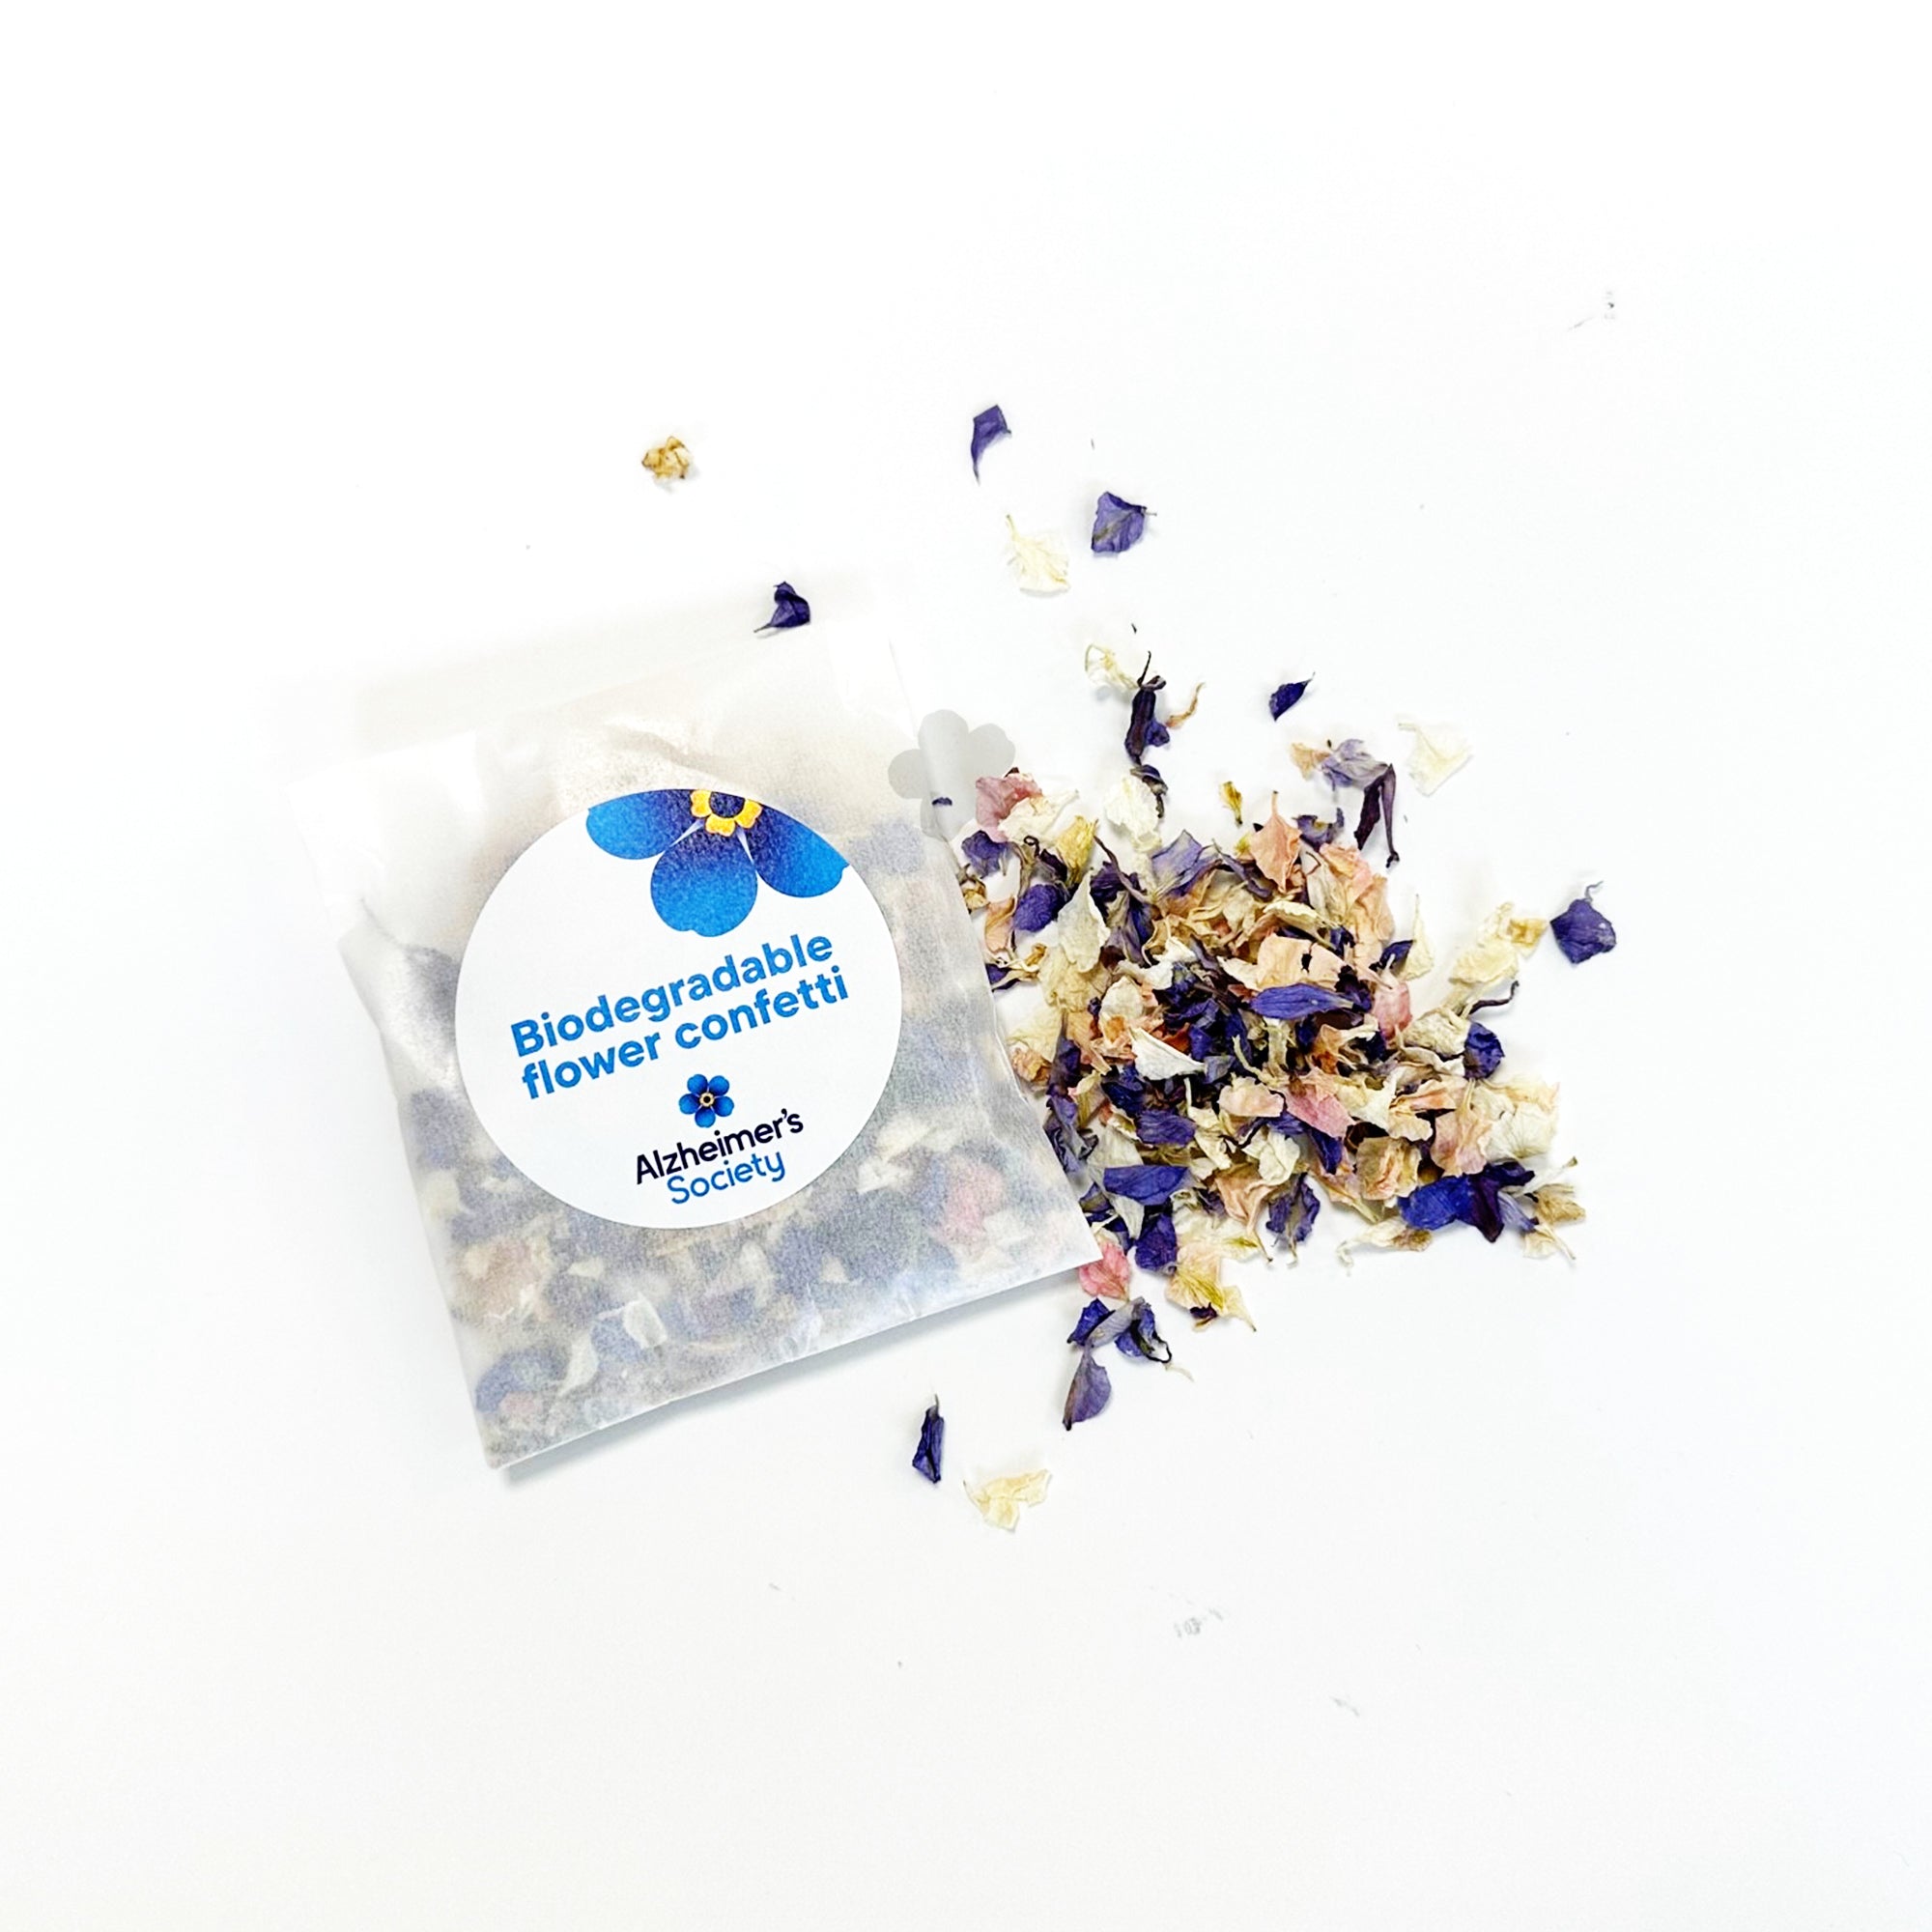 Alzheimer's Society's biodegradable flower confetti sold in a paper packet.